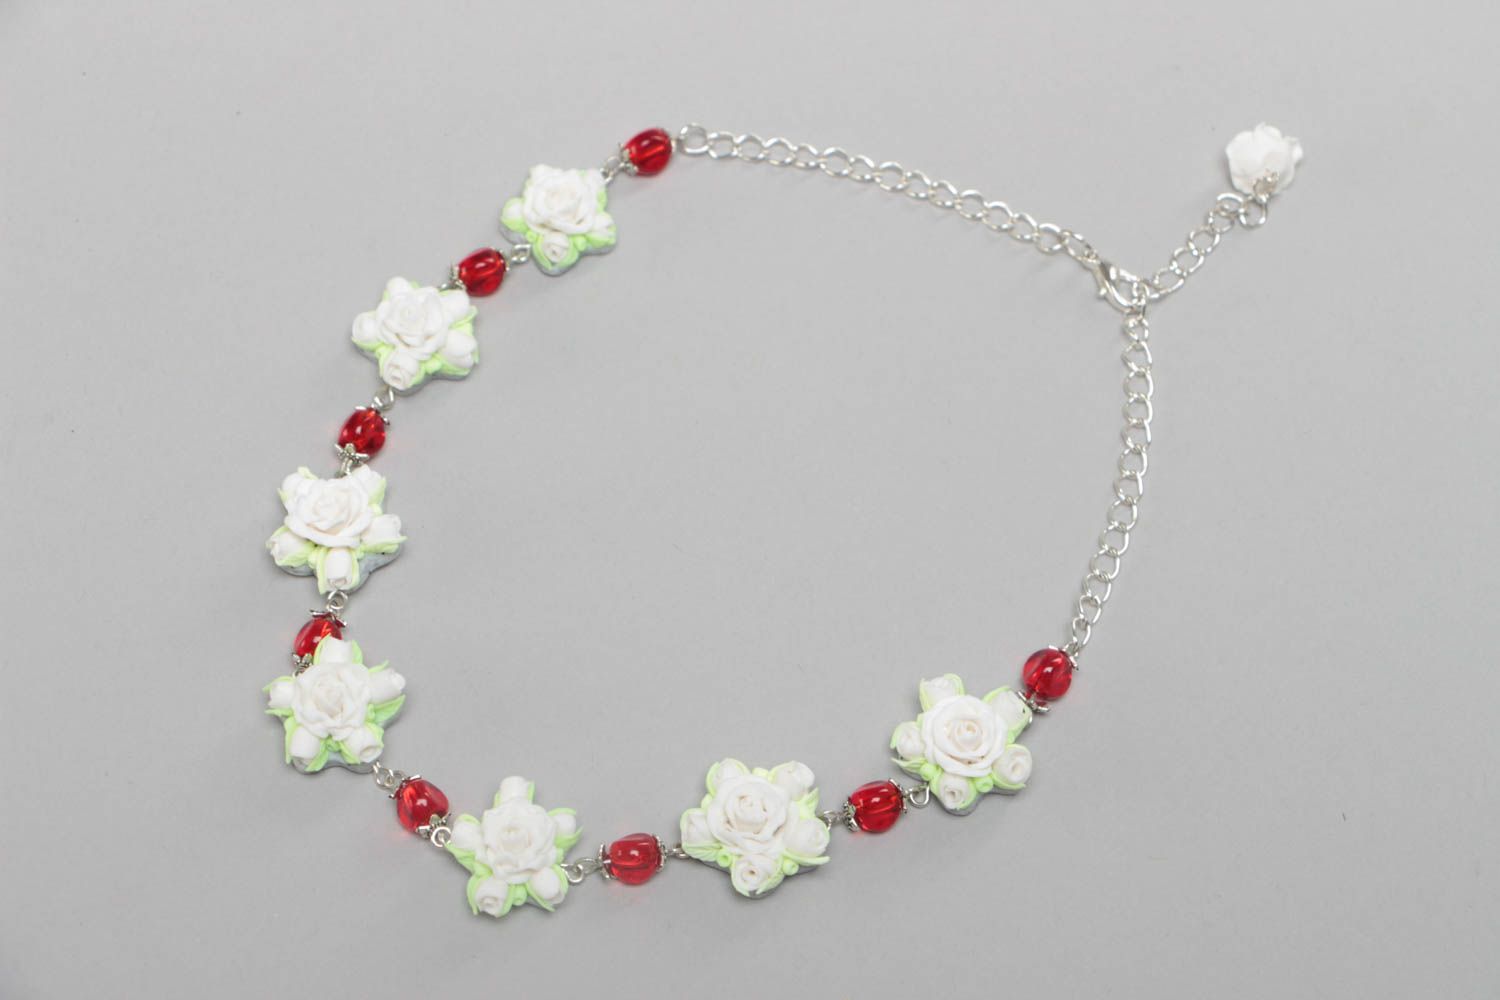 Necklace made of polymer clay with white roses handmade designer jewelry photo 2